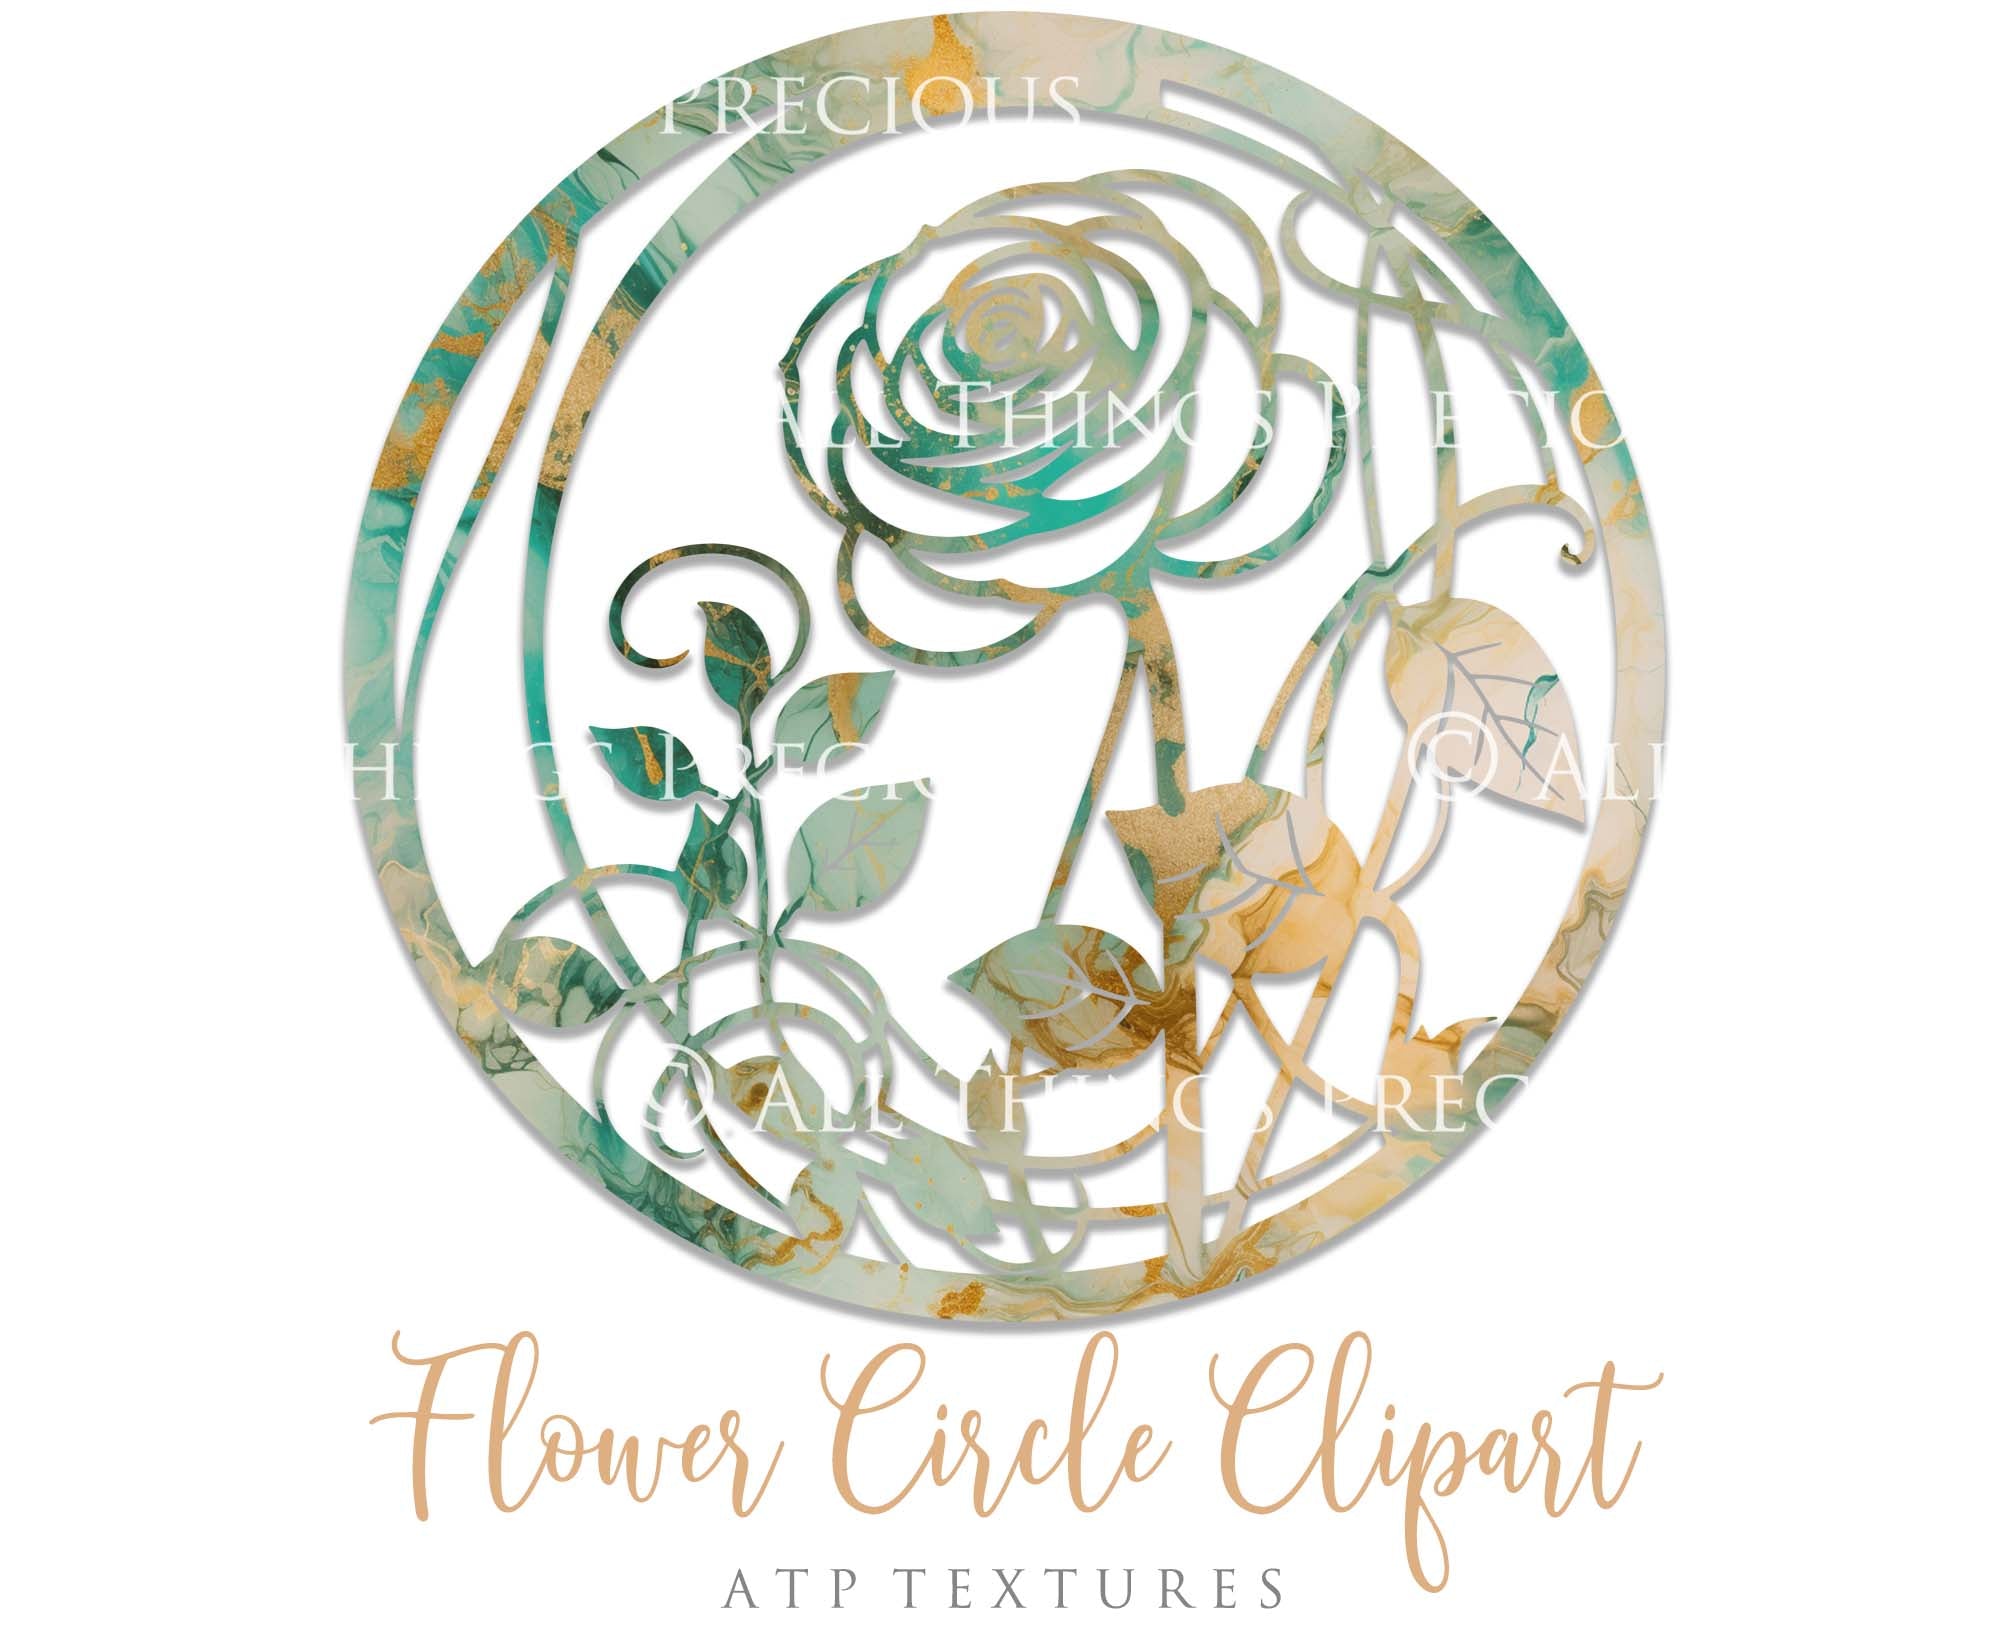 Svg Flower Circle Clipart. Svg, Png Clipart for Cricut or Silhouette Cameo. Sublimation art. High resolution files. Sublimation. Print.Svg Flower Circle Clipart. Svg, Png Clipart for Cricut or Silhouette Cameo. Sublimation art. High resolution files. Sublimation. Print.